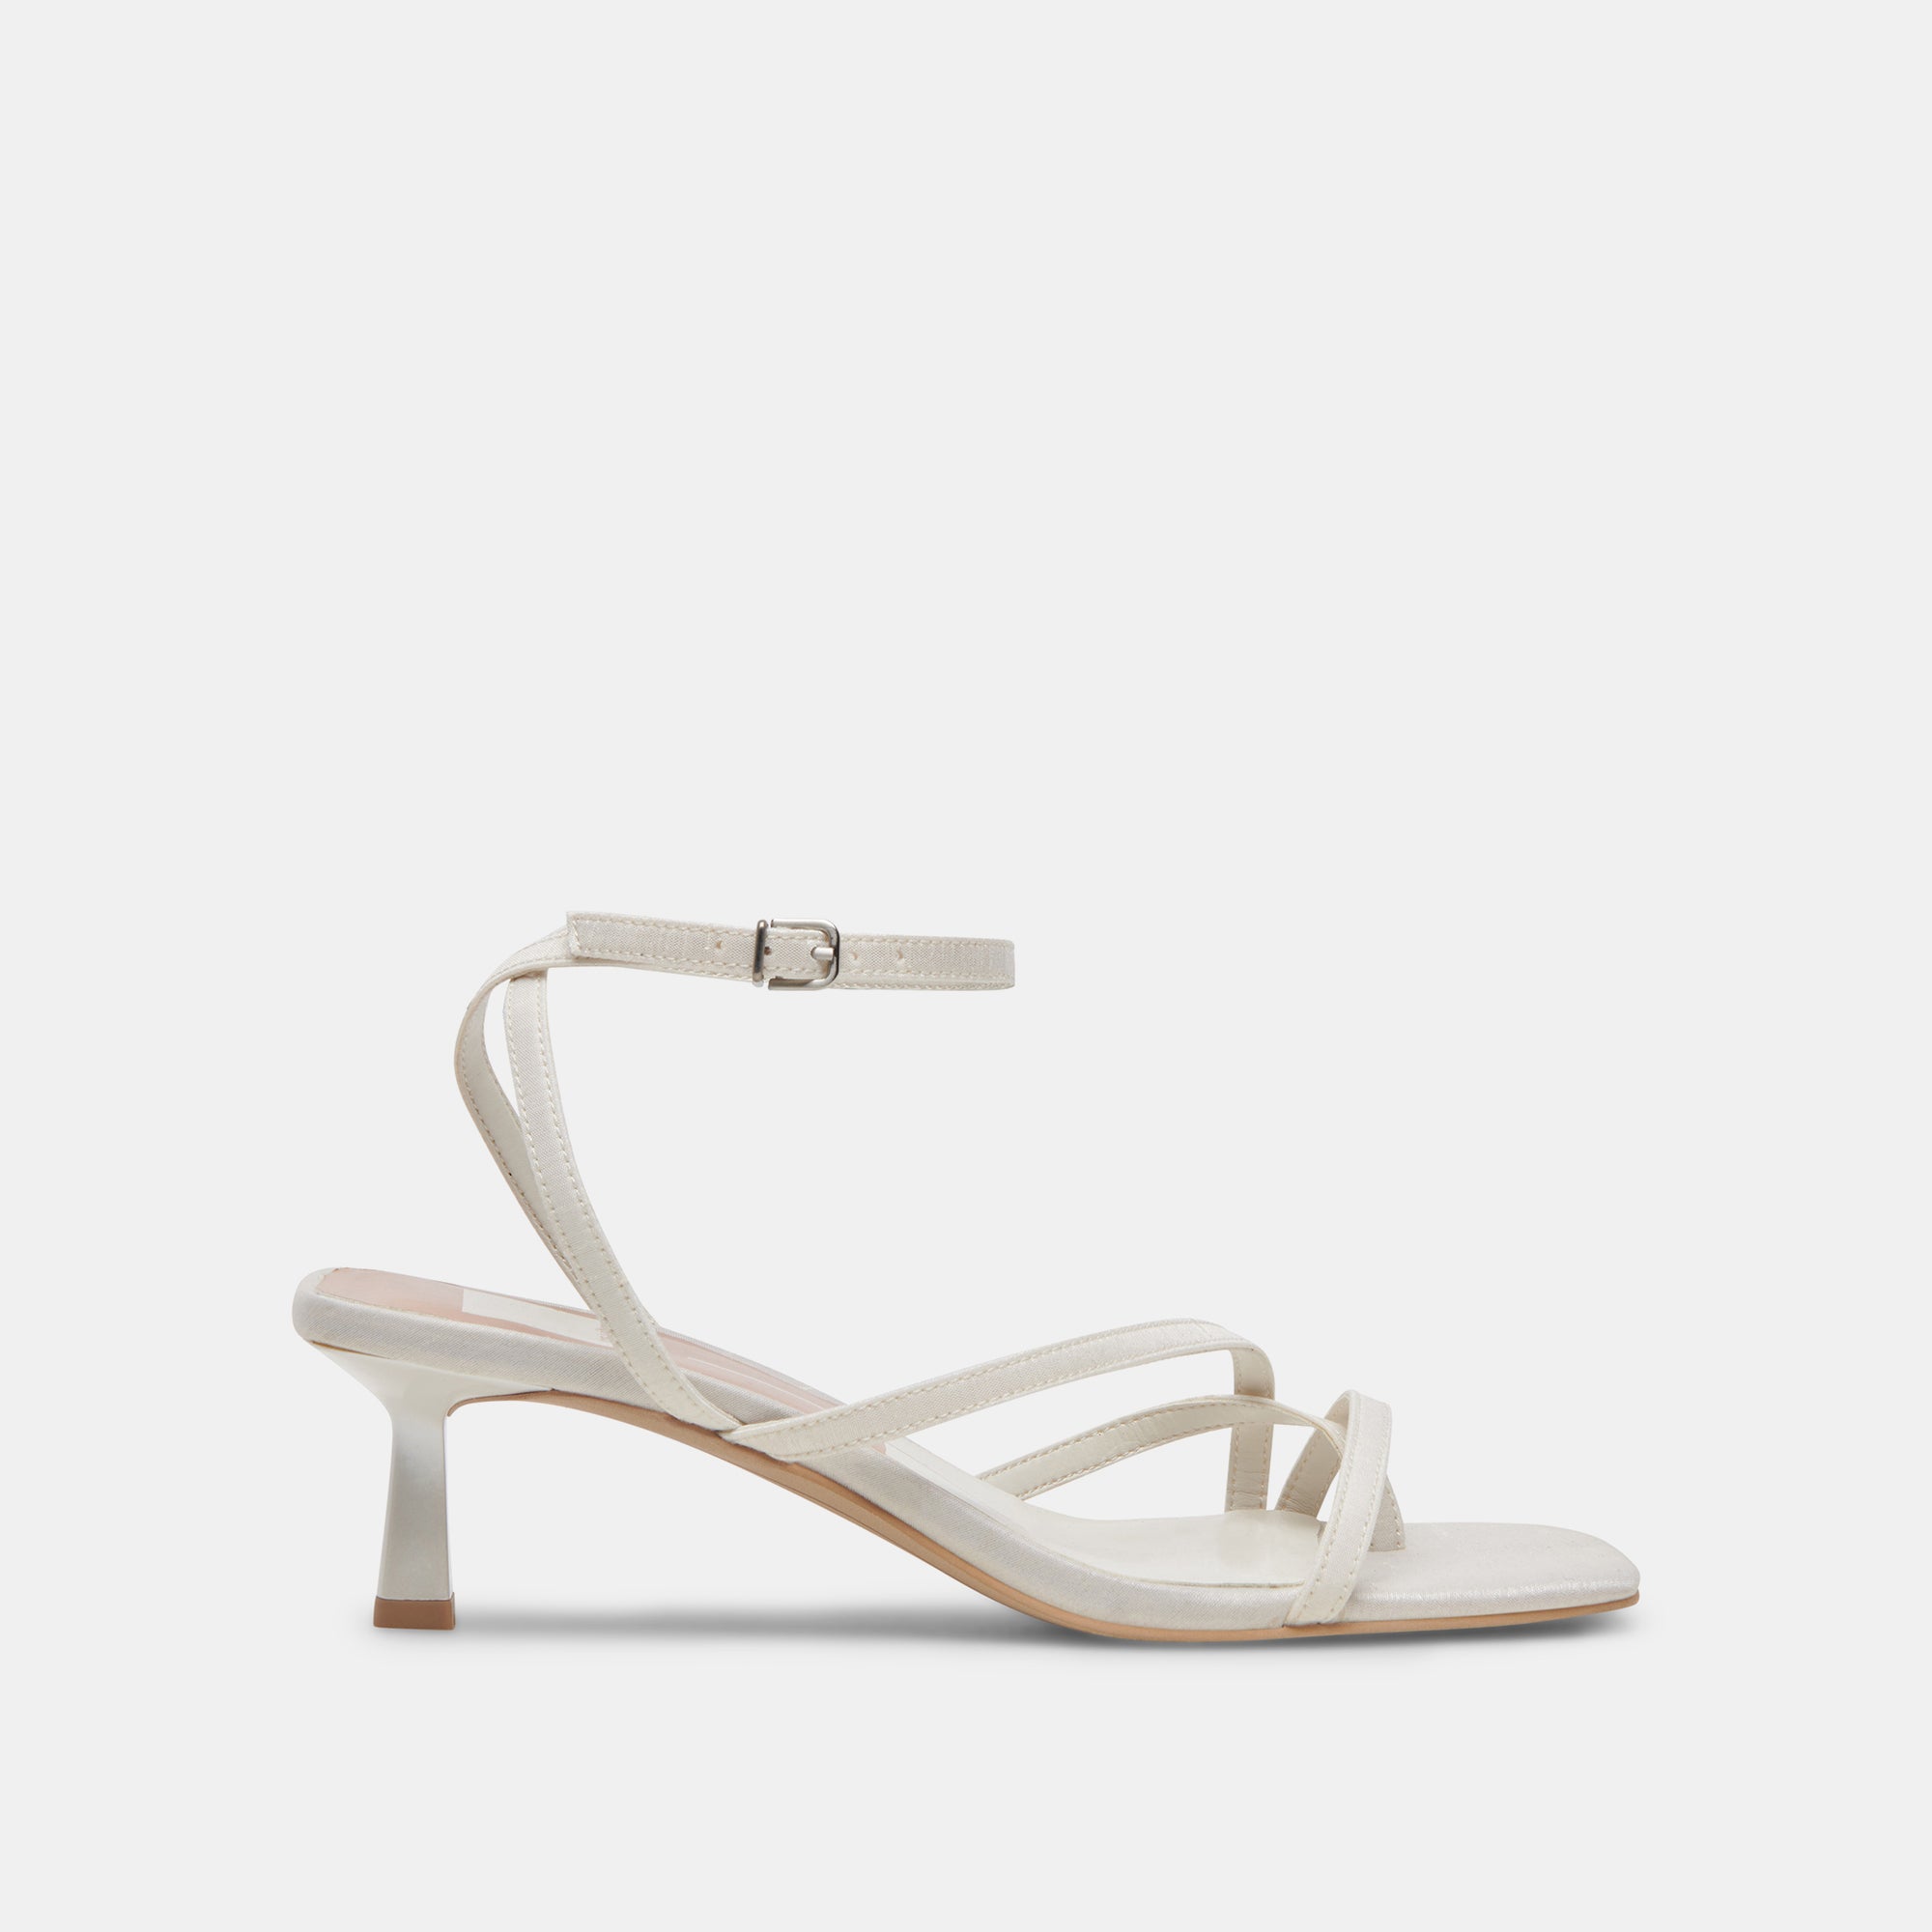 Dressberry Off White Heels - Buy Dressberry Off White Heels online in India